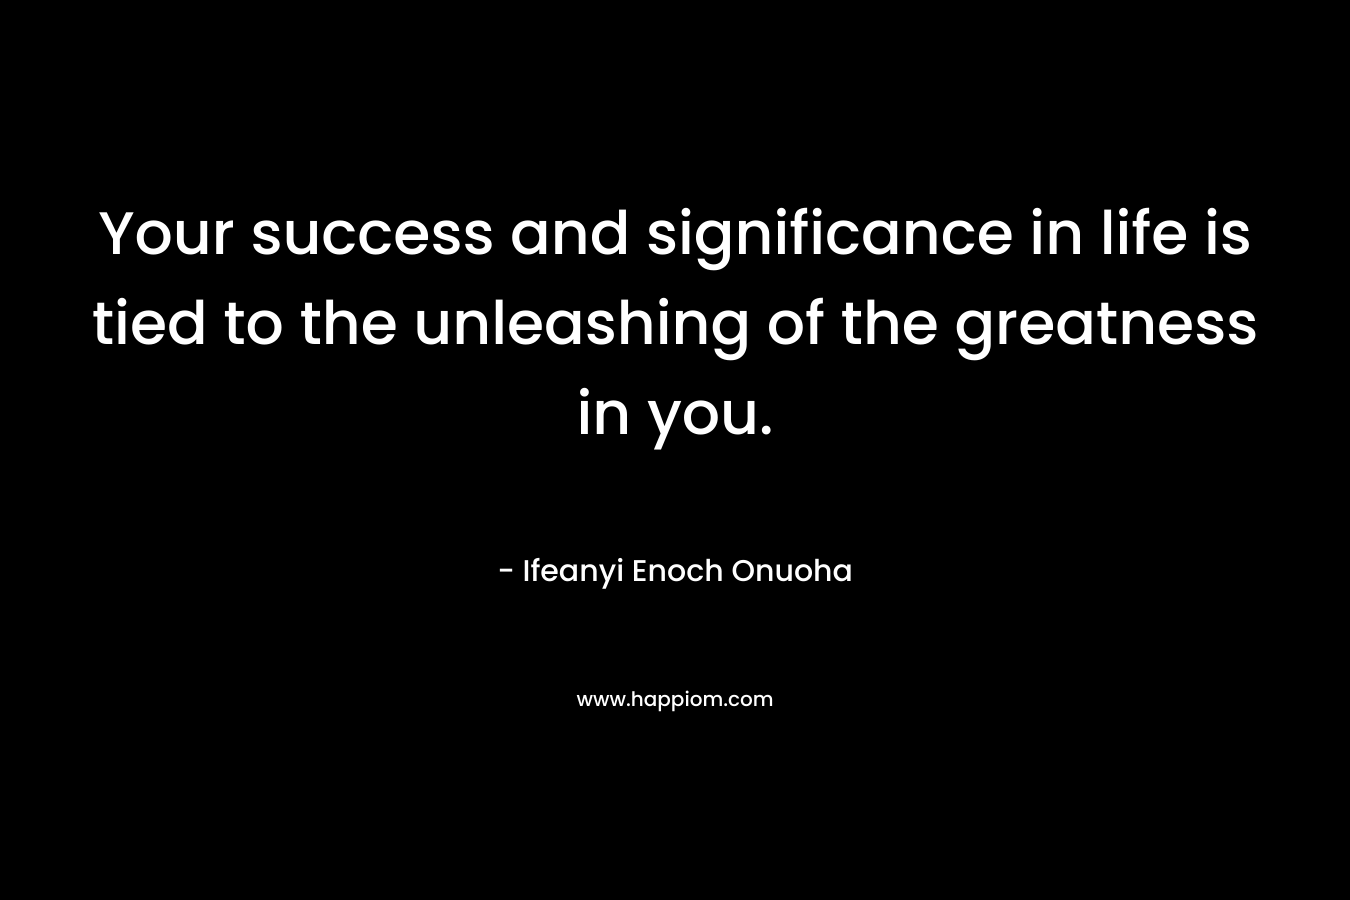 Your success and significance in life is tied to the unleashing of the greatness in you.